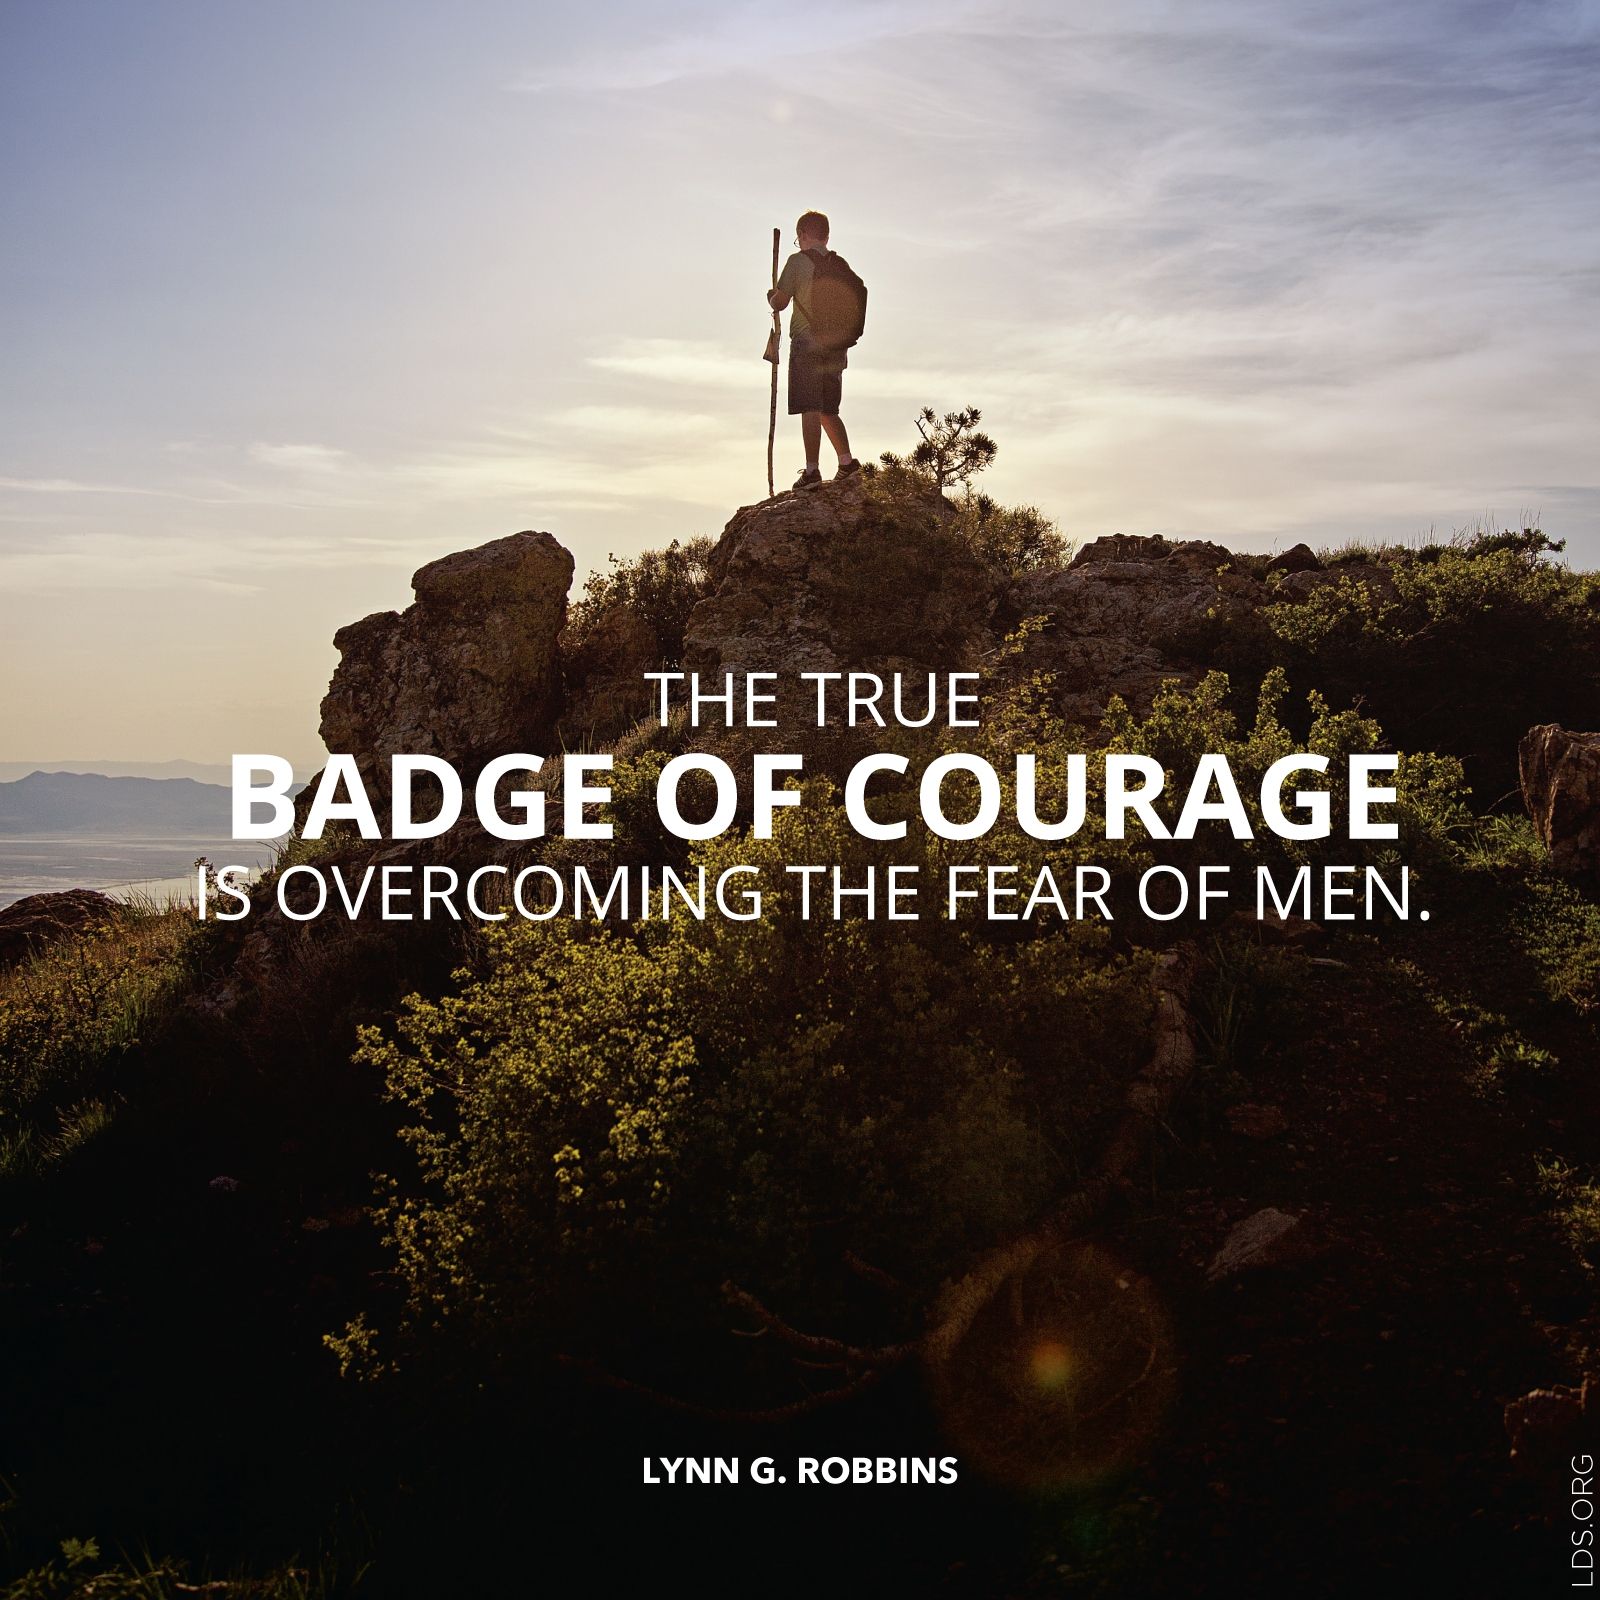 “The true badge of courage is overcoming the fear of men.”—Elder Lynn G. Robbins, “Which Way Do You Face?” © undefined ipCode 1.